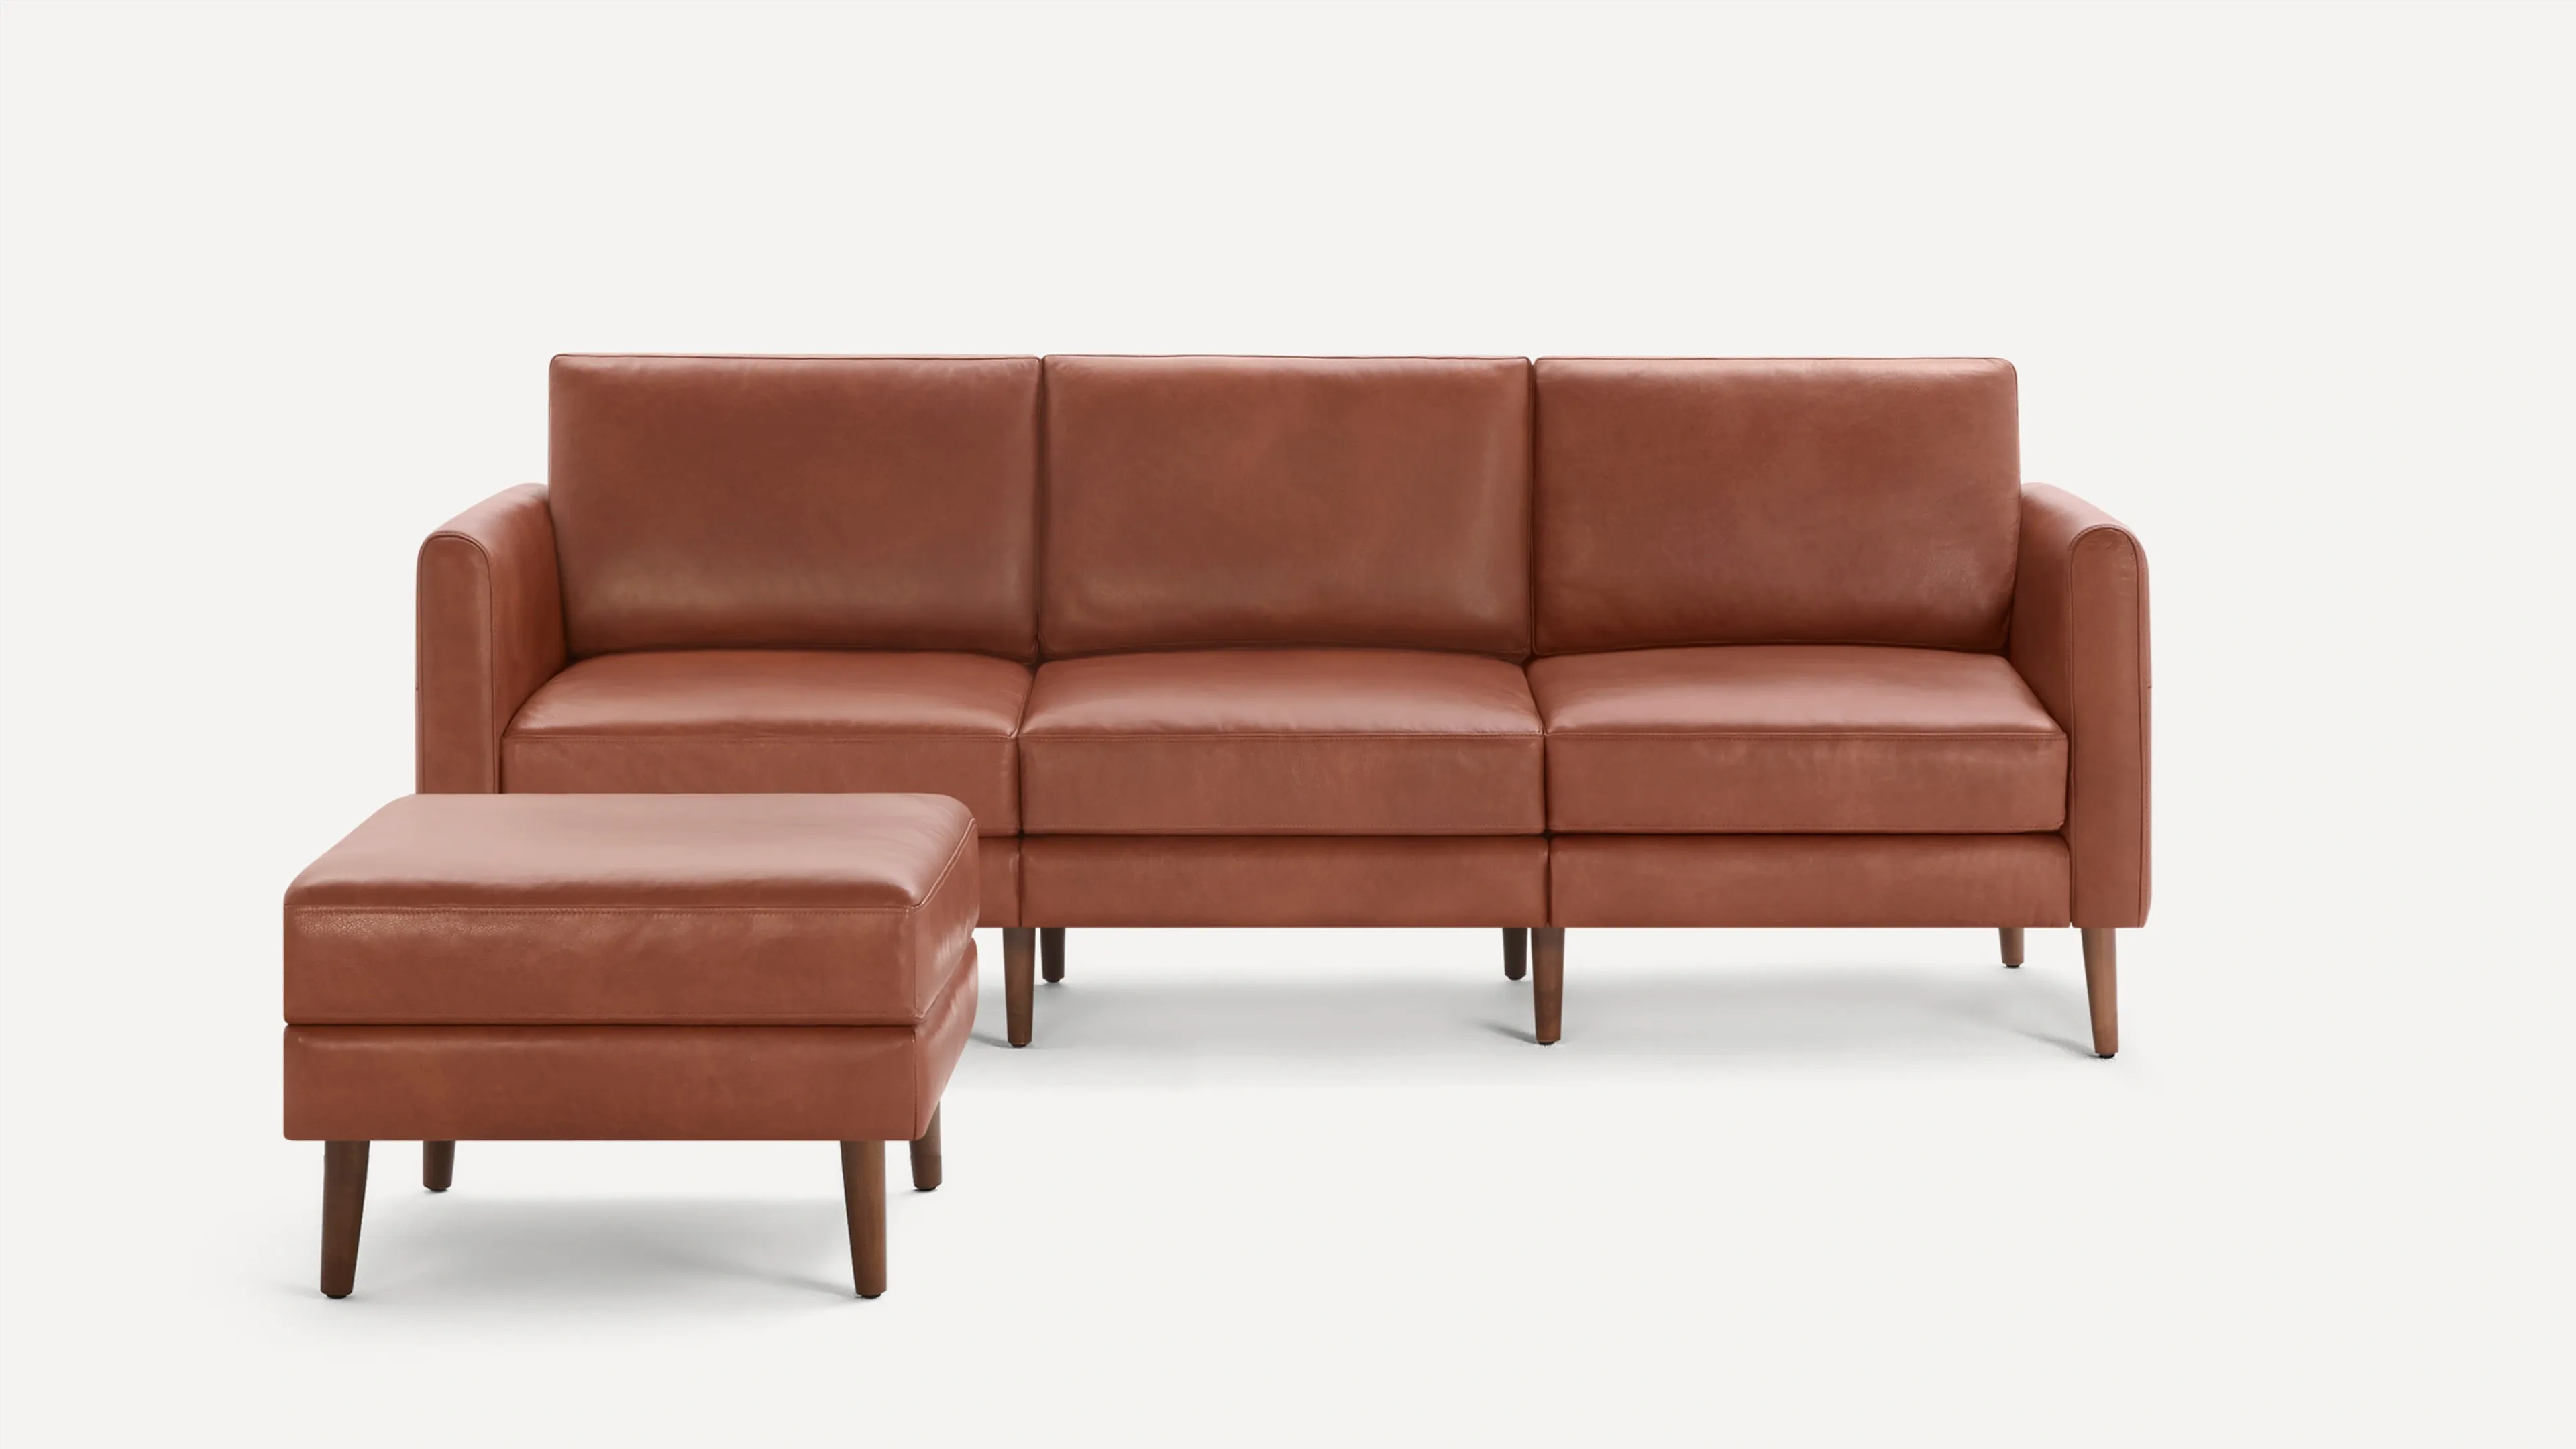 Original Nomad Sofa with Ottoman in Chestnut Leather